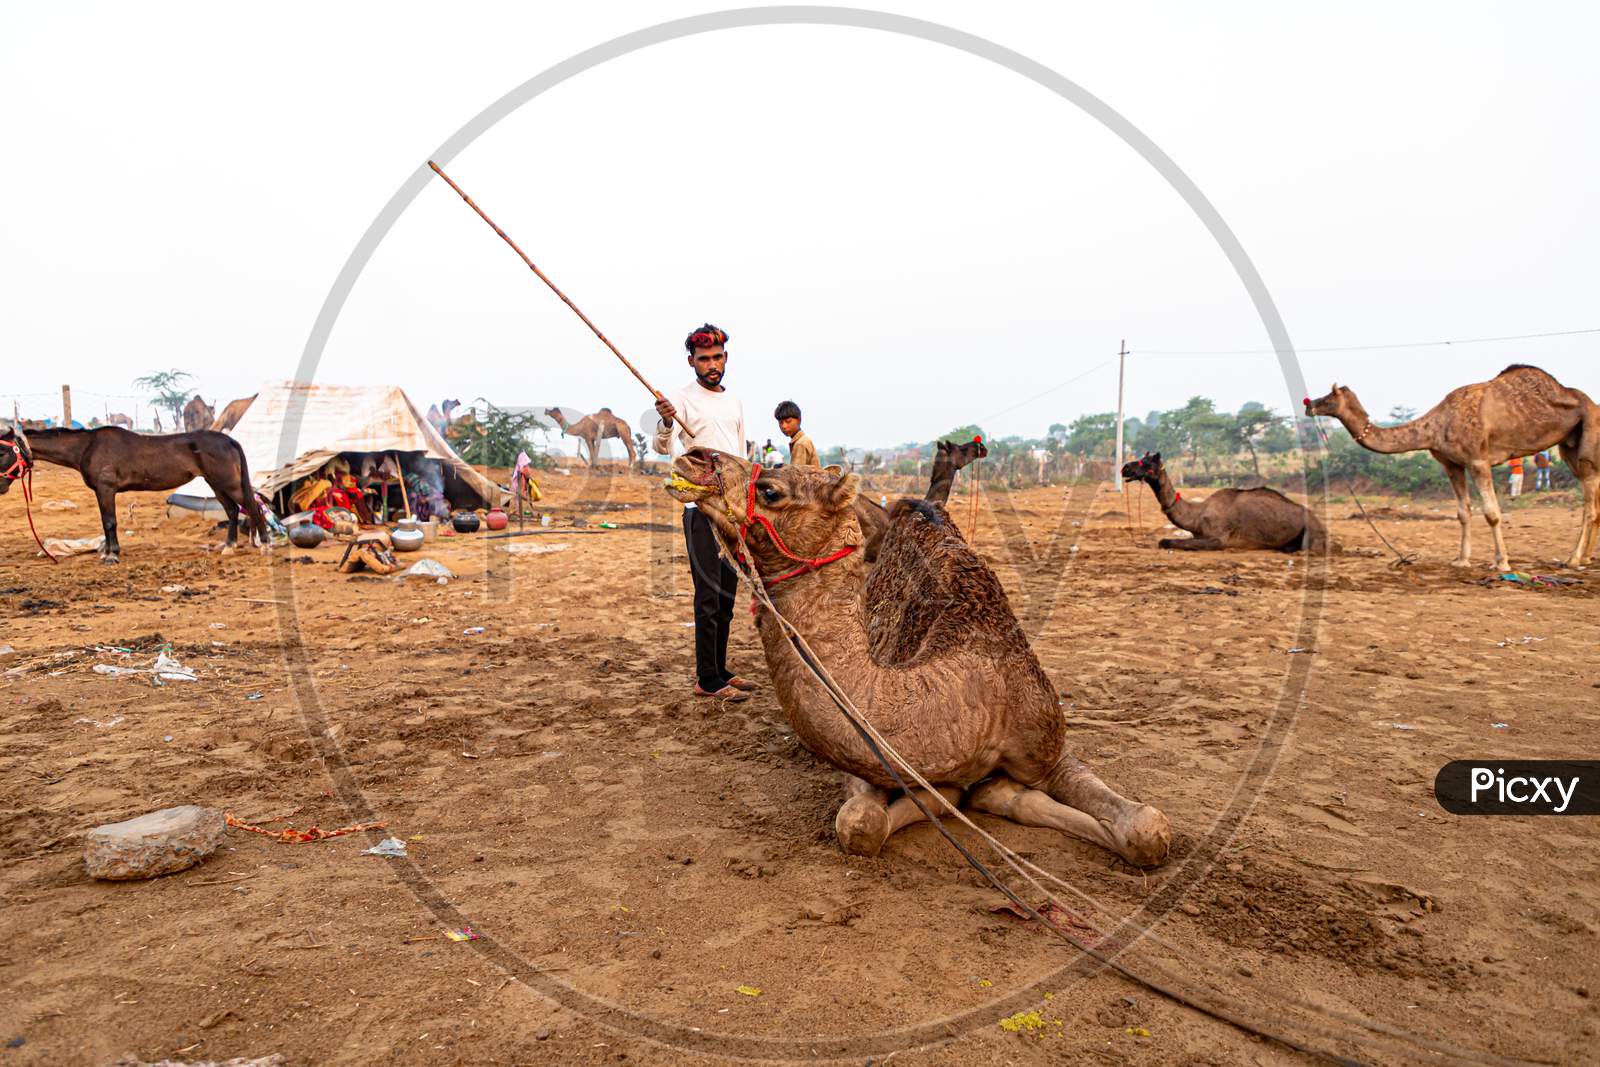 A Camelees With Its Camel At Pushkar Camel Festival.